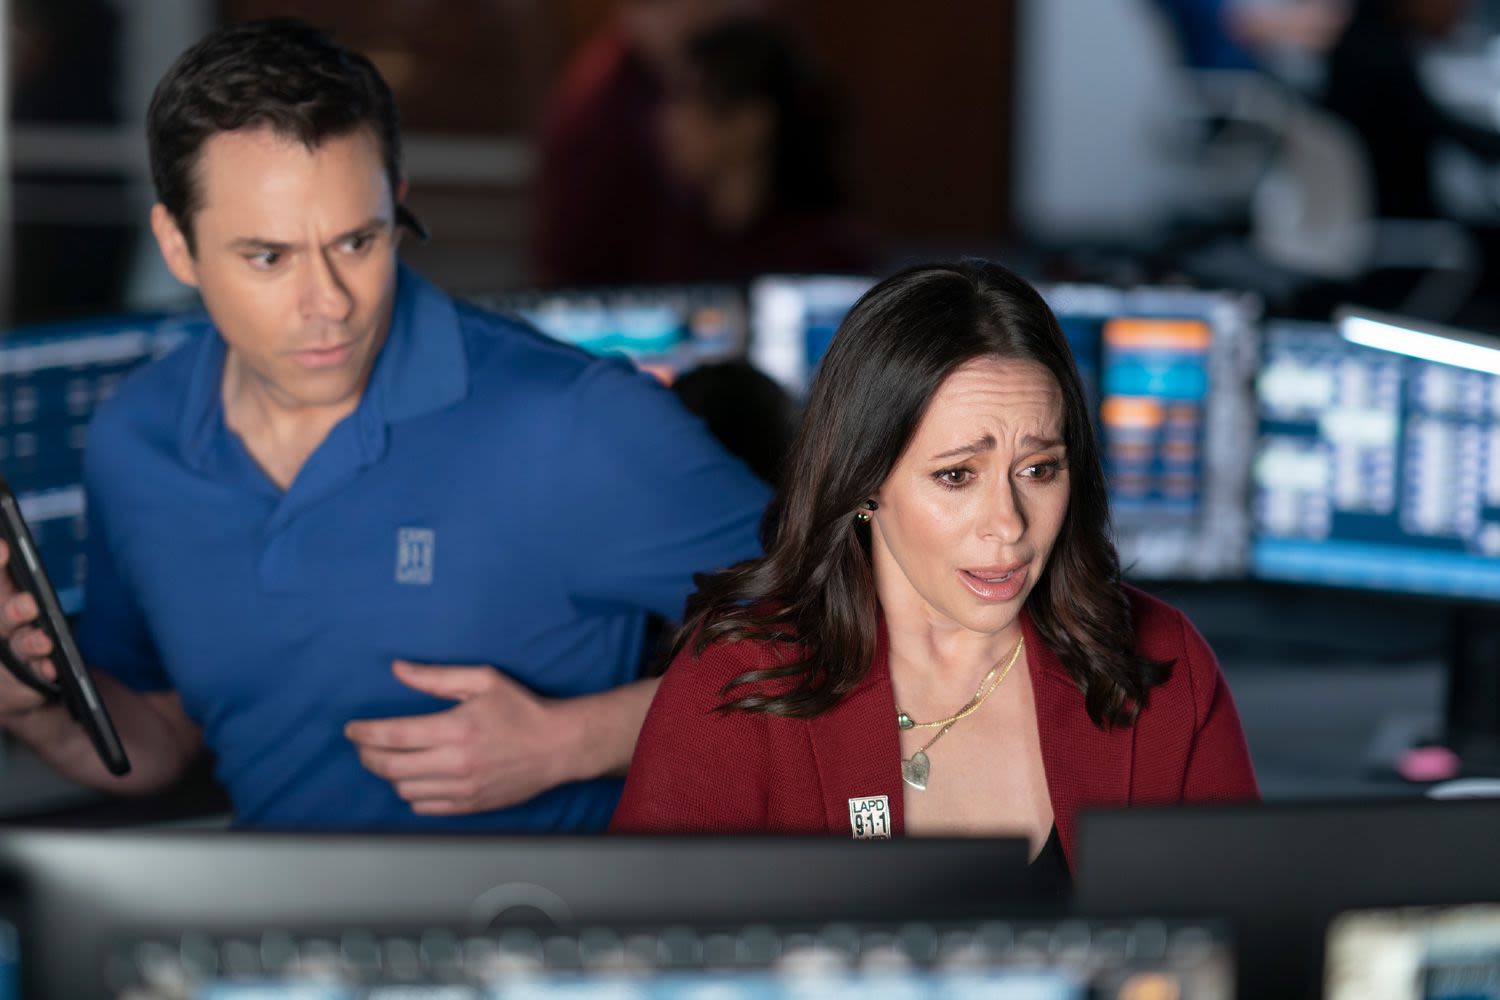 '9-1-1' dispatcher Maddie takes a triggering call in exclusive preview clip